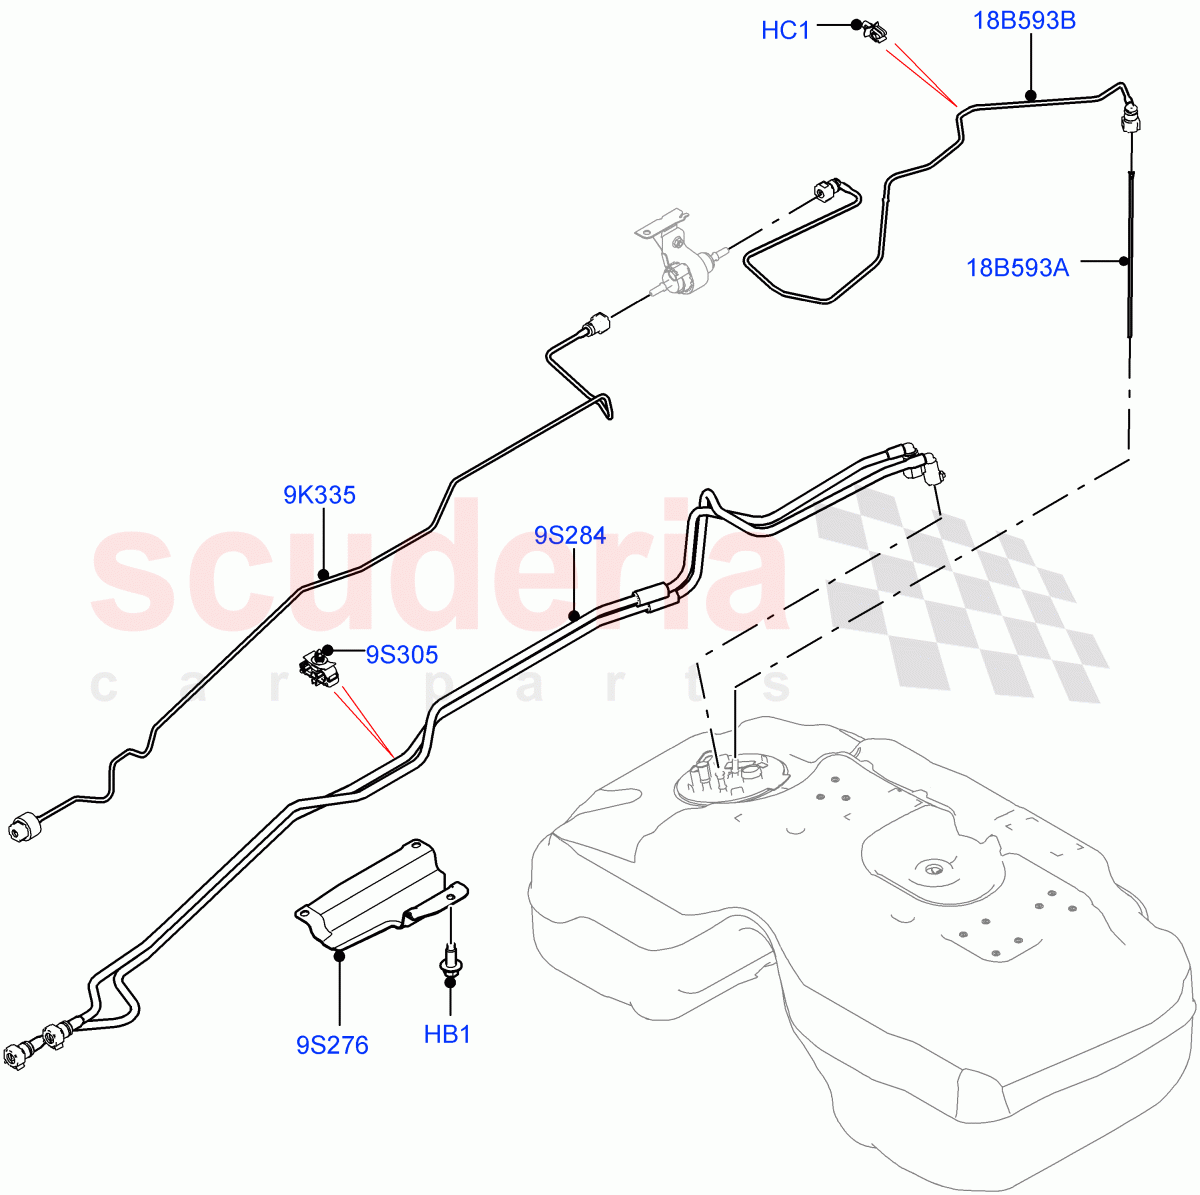 Fuel Lines(Rear)(2.0L AJ20D4 Diesel Mid PTA,Halewood (UK),2.0L AJ20D4 Diesel High PTA,2.0L AJ20D4 Diesel LF PTA)((V)FROMLH000001) of Land Rover Land Rover Discovery Sport (2015+) [2.0 Turbo Diesel]